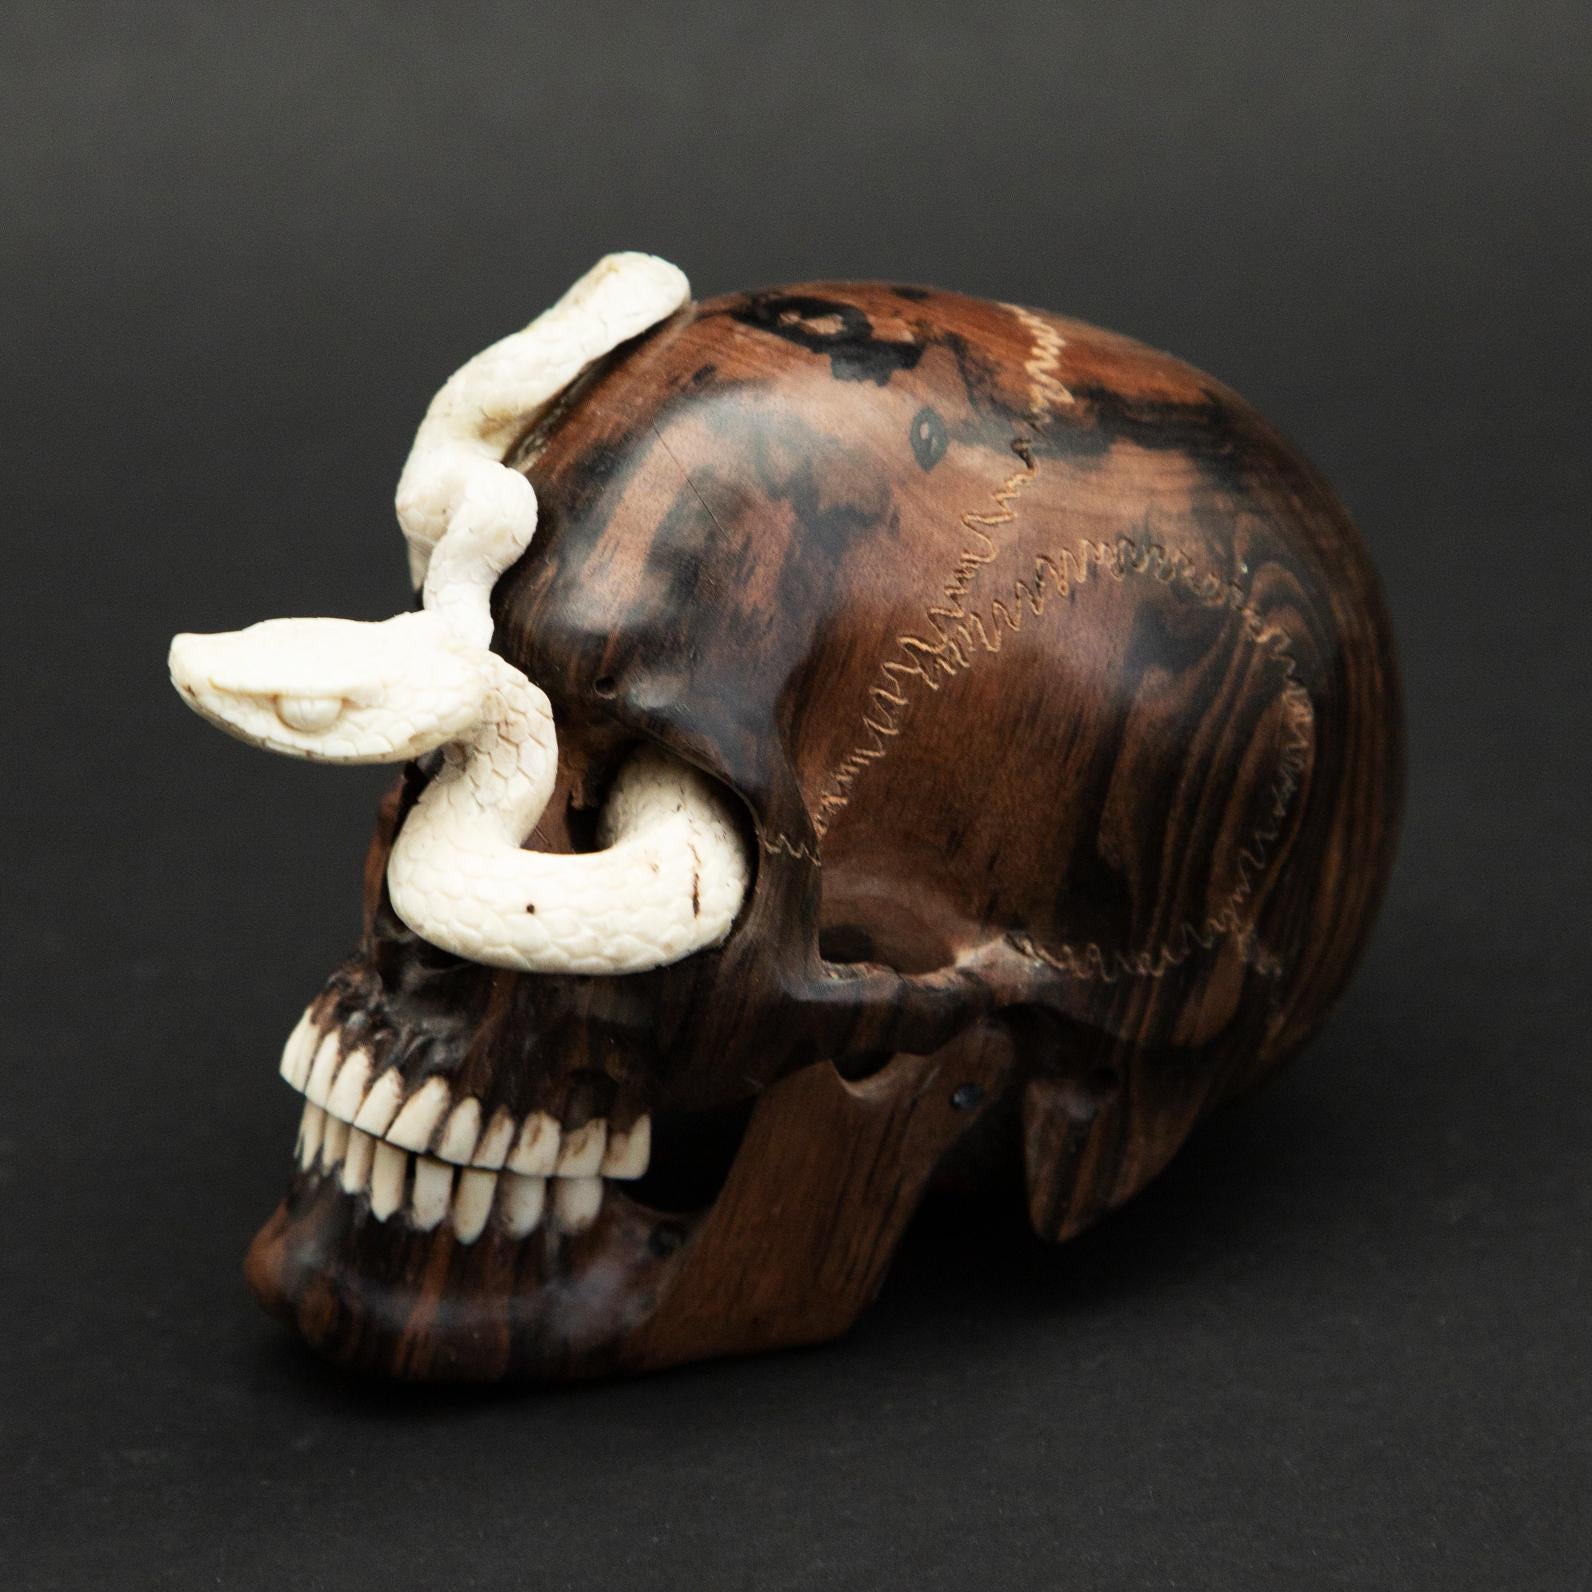 Beautifully sculpted wood skull with a carved moose antler snake. Meticulously created by skilled Indonesian artists, this is a one of a kind piece.